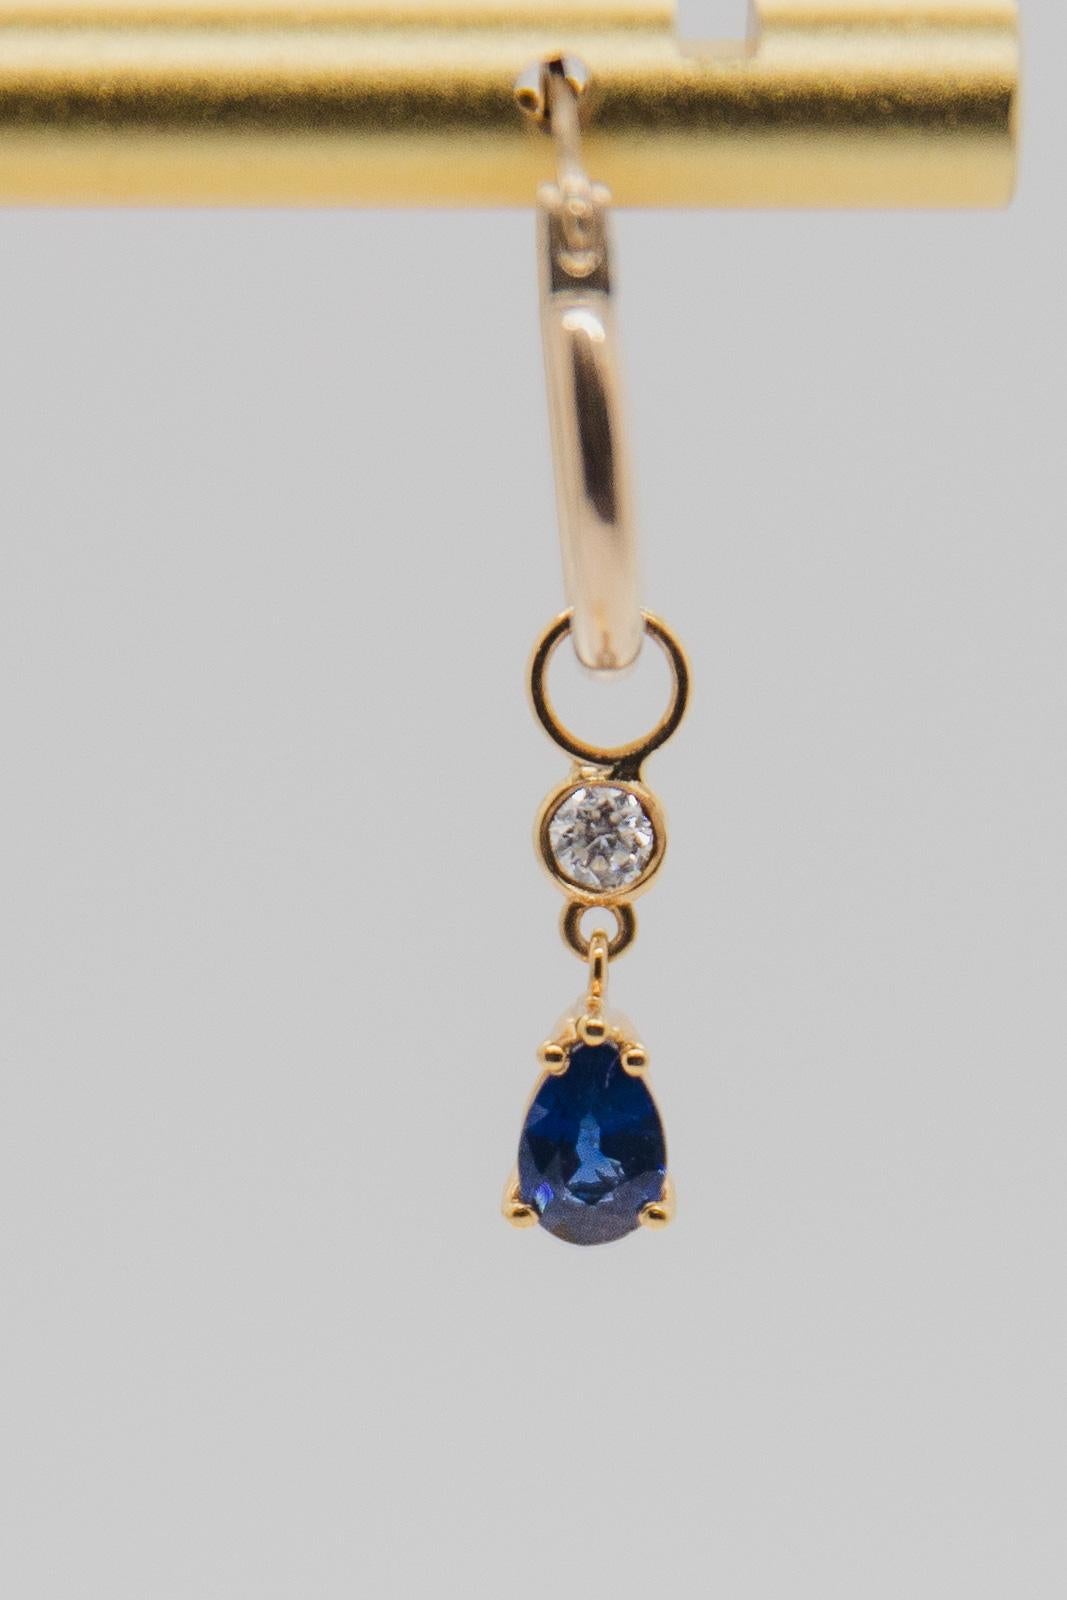 Pear Cut Detachable 1.20 Carat Sapphire and Diamond Charm Earring with Hoop Earring For Sale